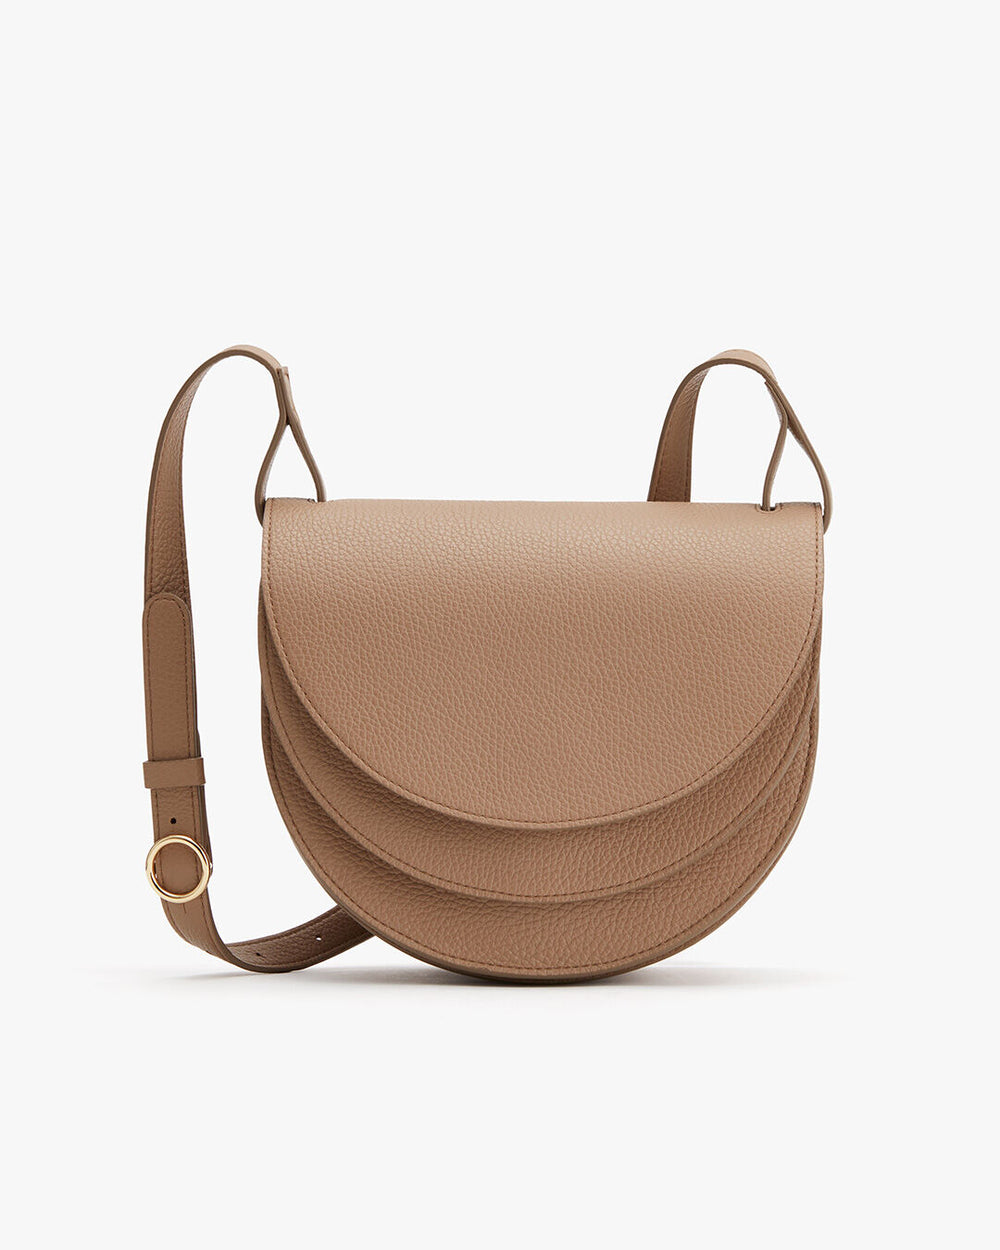 Handbag with a flap front and adjustable strap on a plain background.